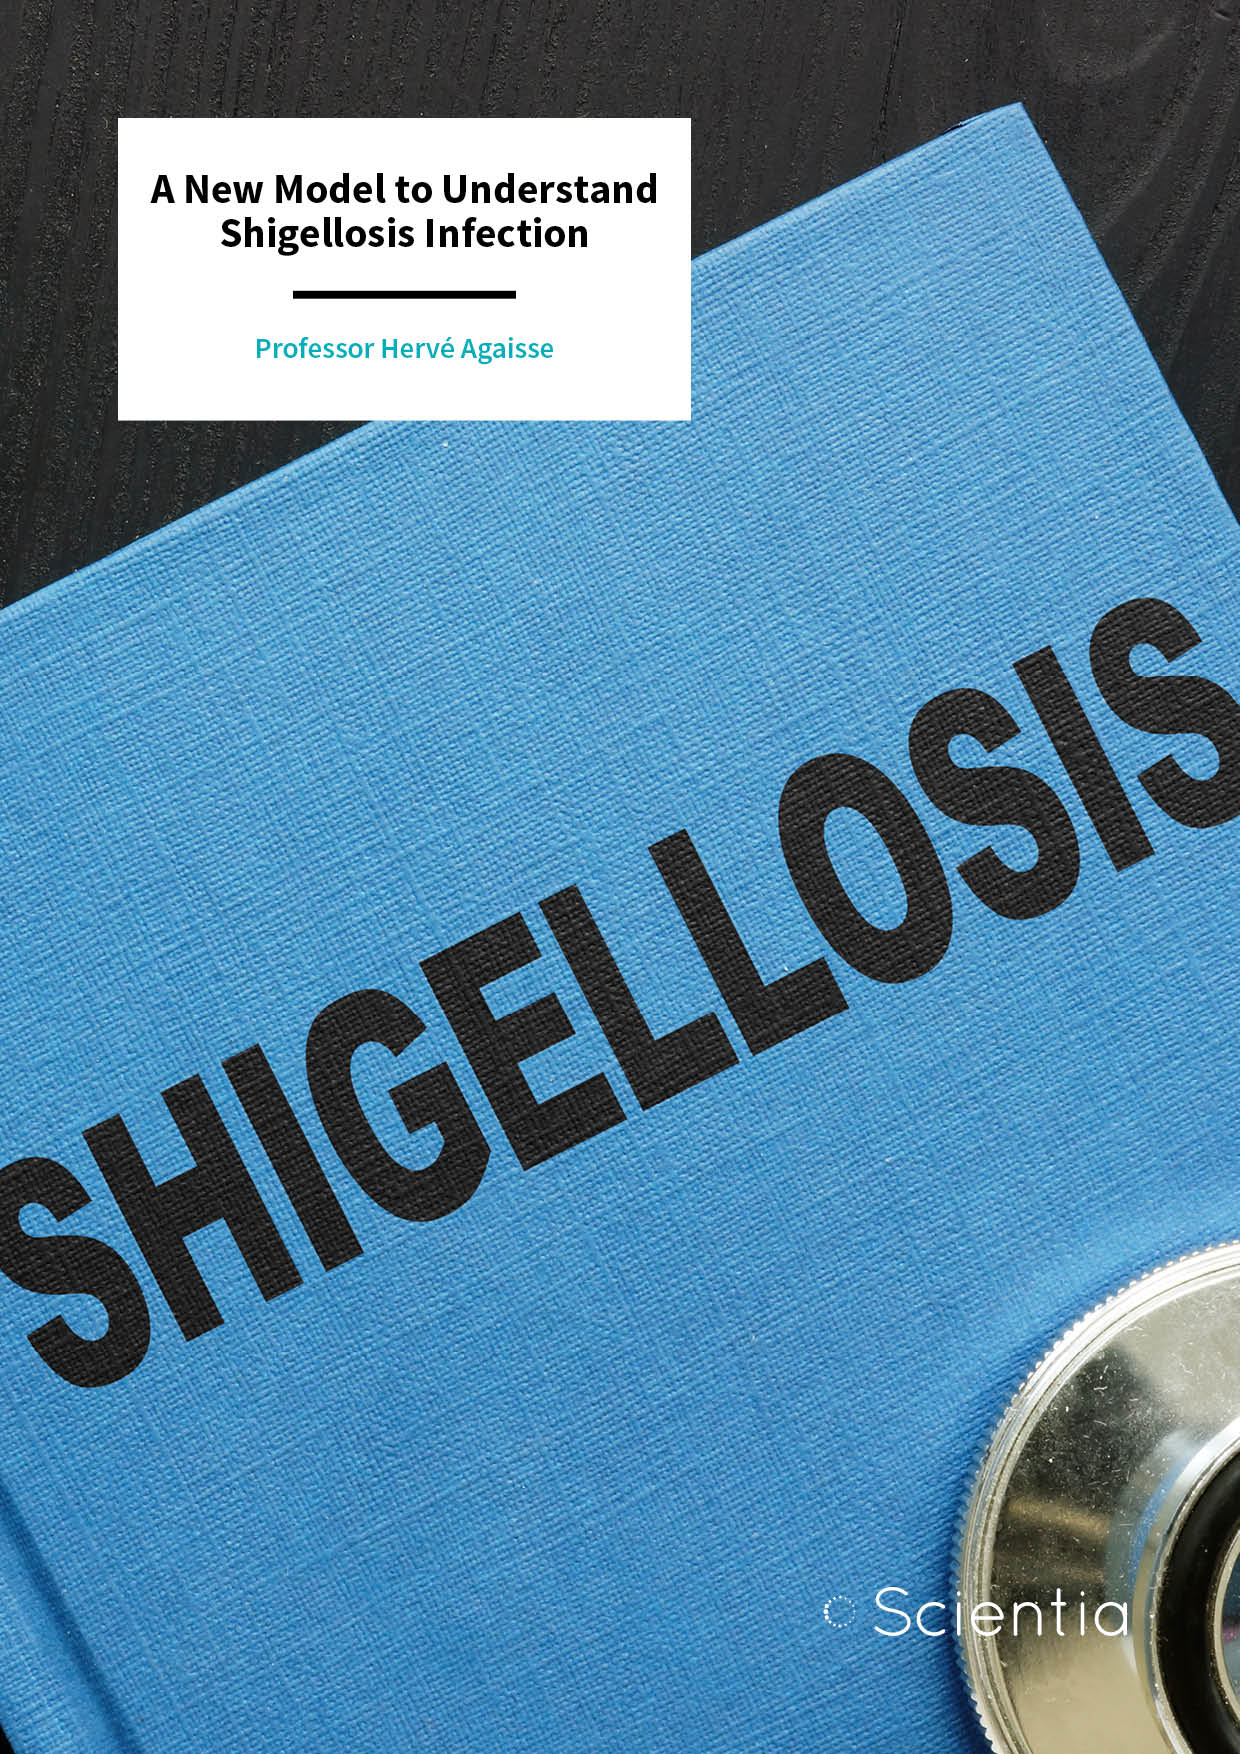 Professor Hervé Agaisse | A New Model to Understand Shigellosis Infection